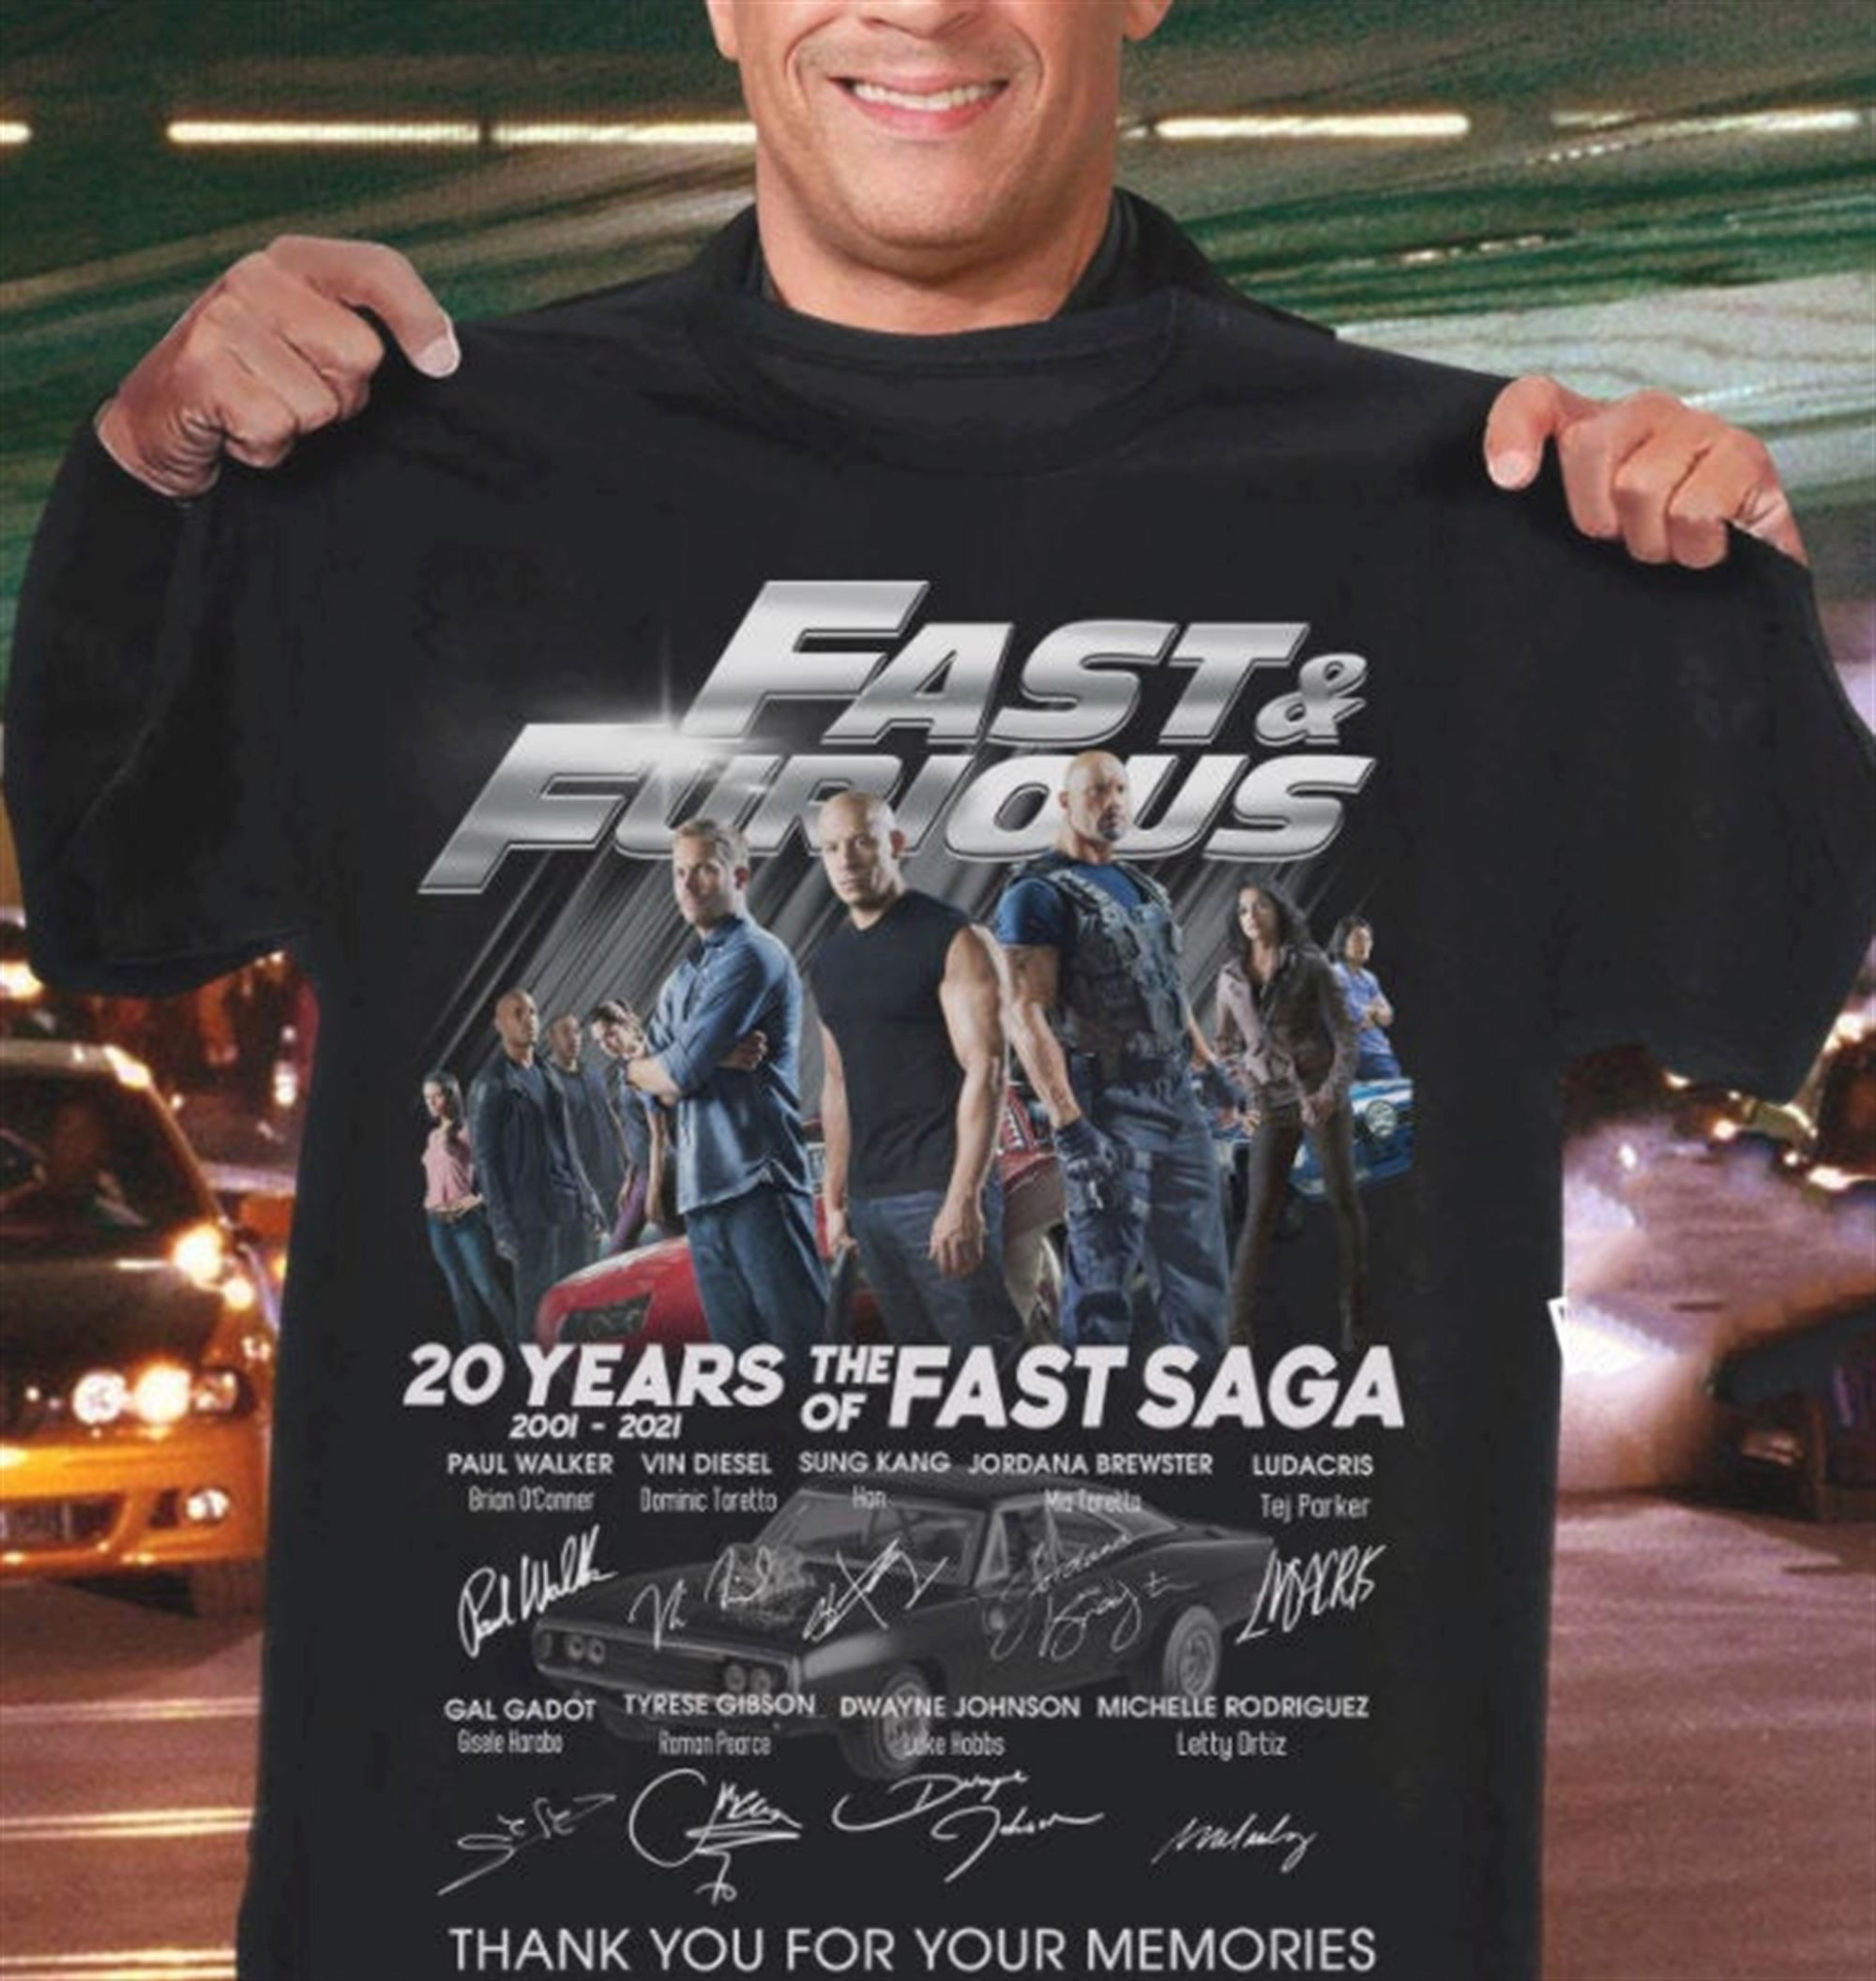 Happy 20 Years Fast And Furious 2001-2021 Ride Or Die Series Shirt Thank You For The Memories Shirt Fast And Furious Anniversary Shirt H 